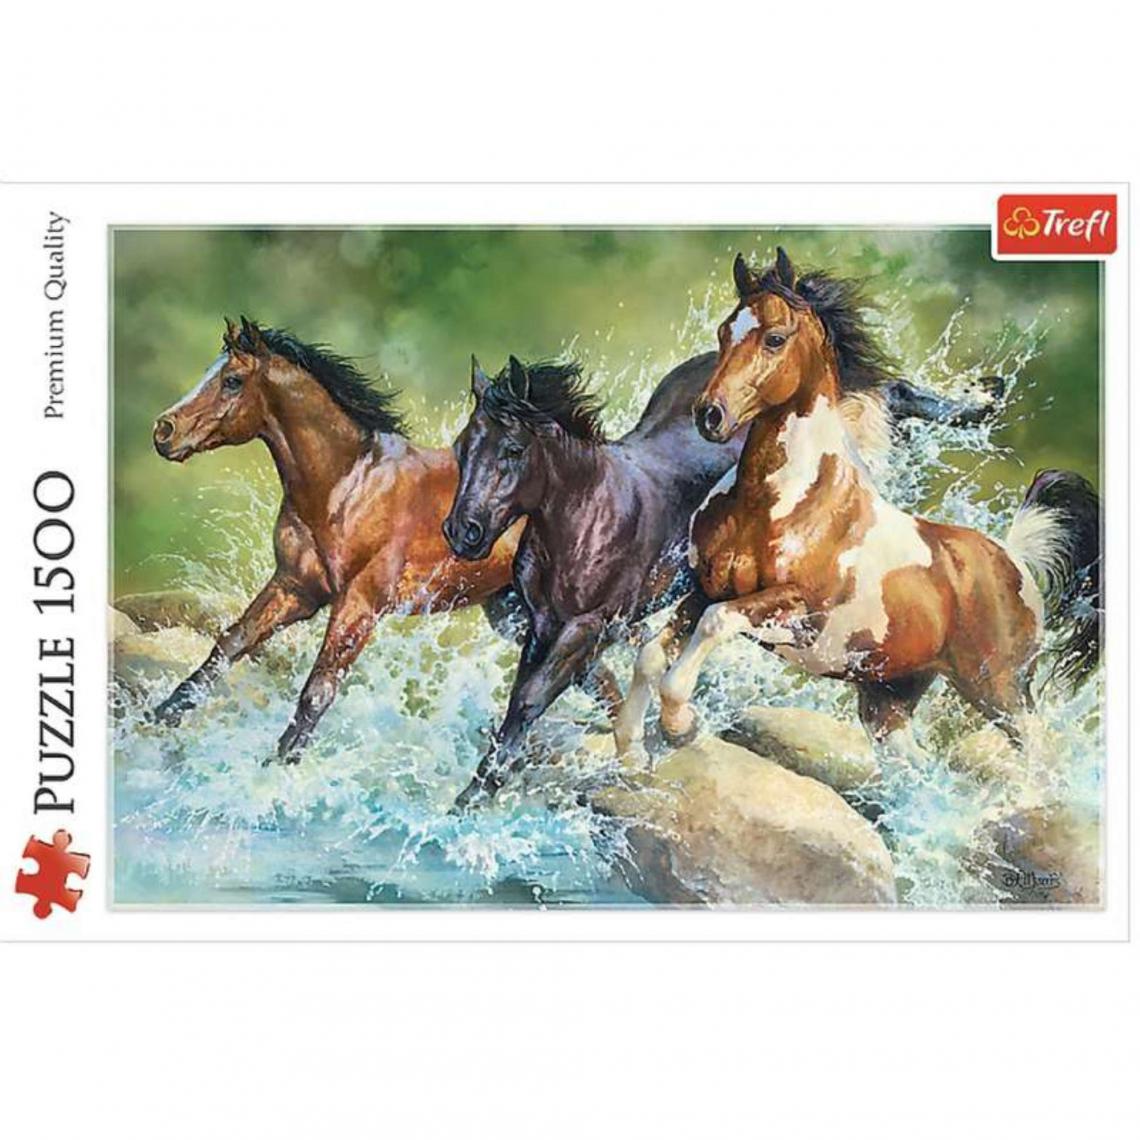 Provence Outillage - Puzzle 3 chevaux sauvages 1500pc - Animaux